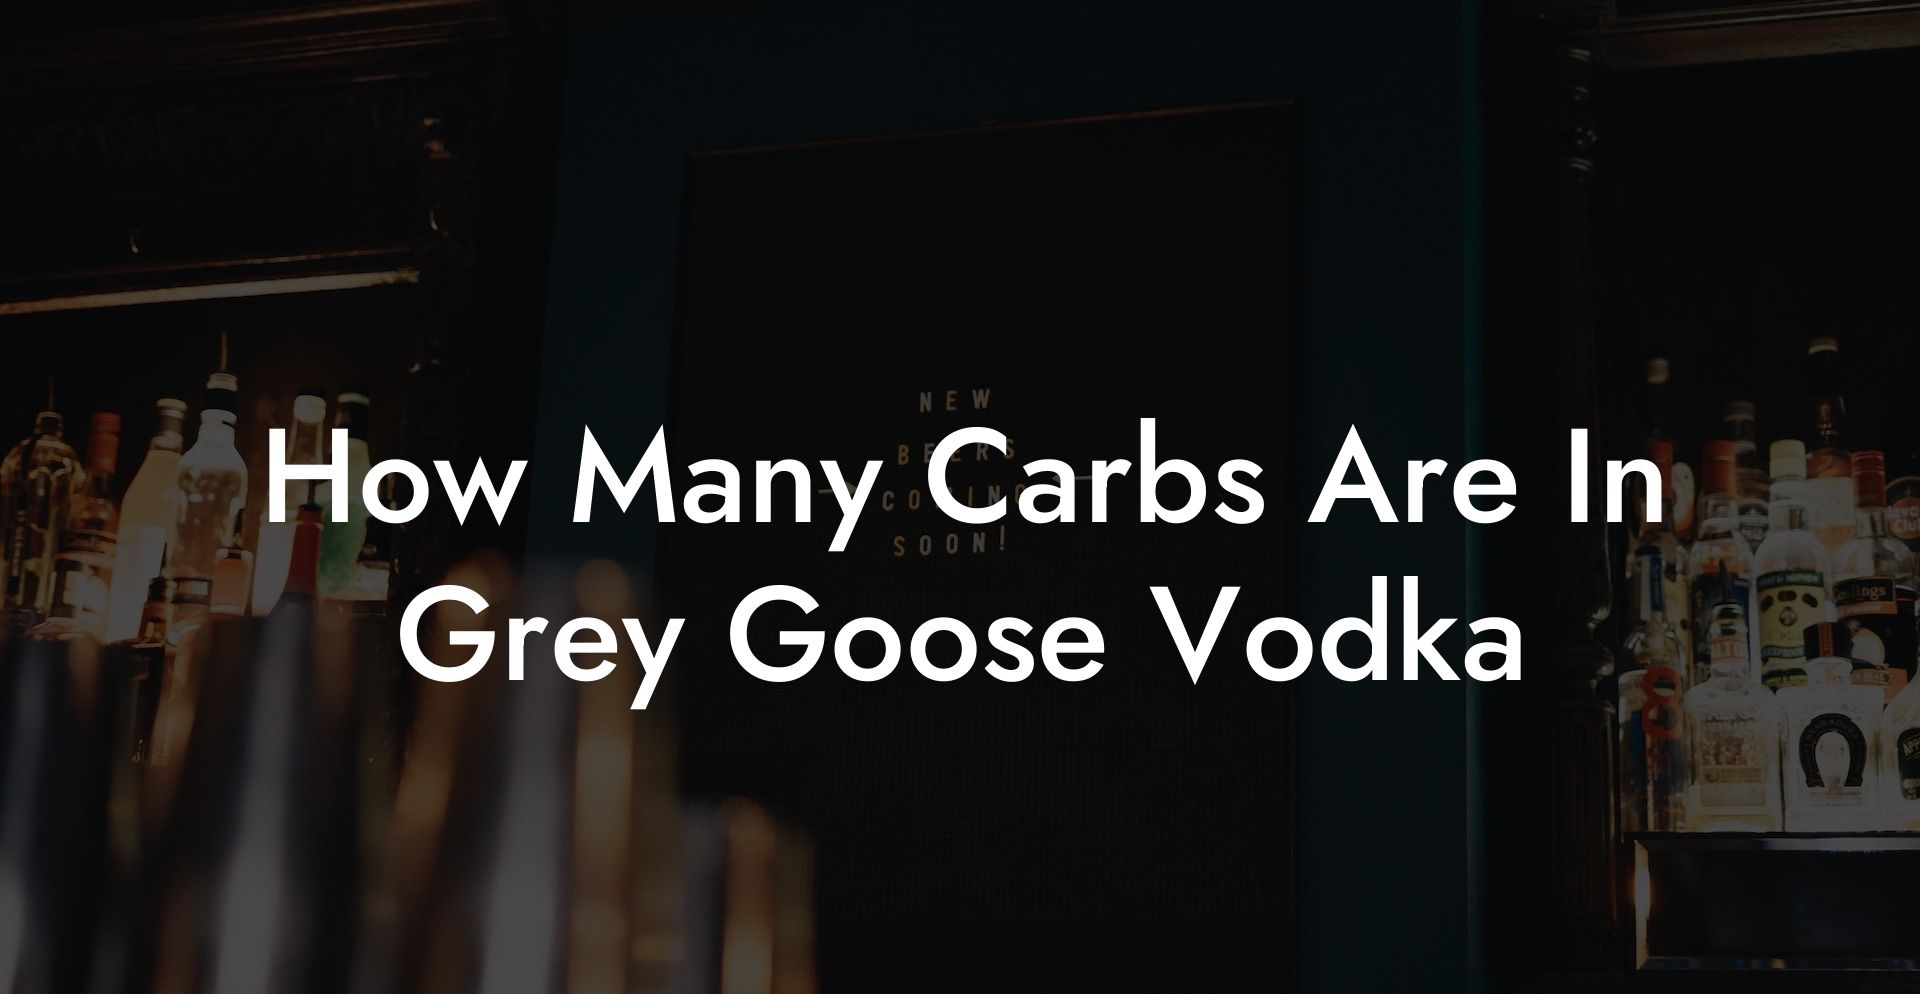 How Many Carbs Are In Grey Goose Vodka